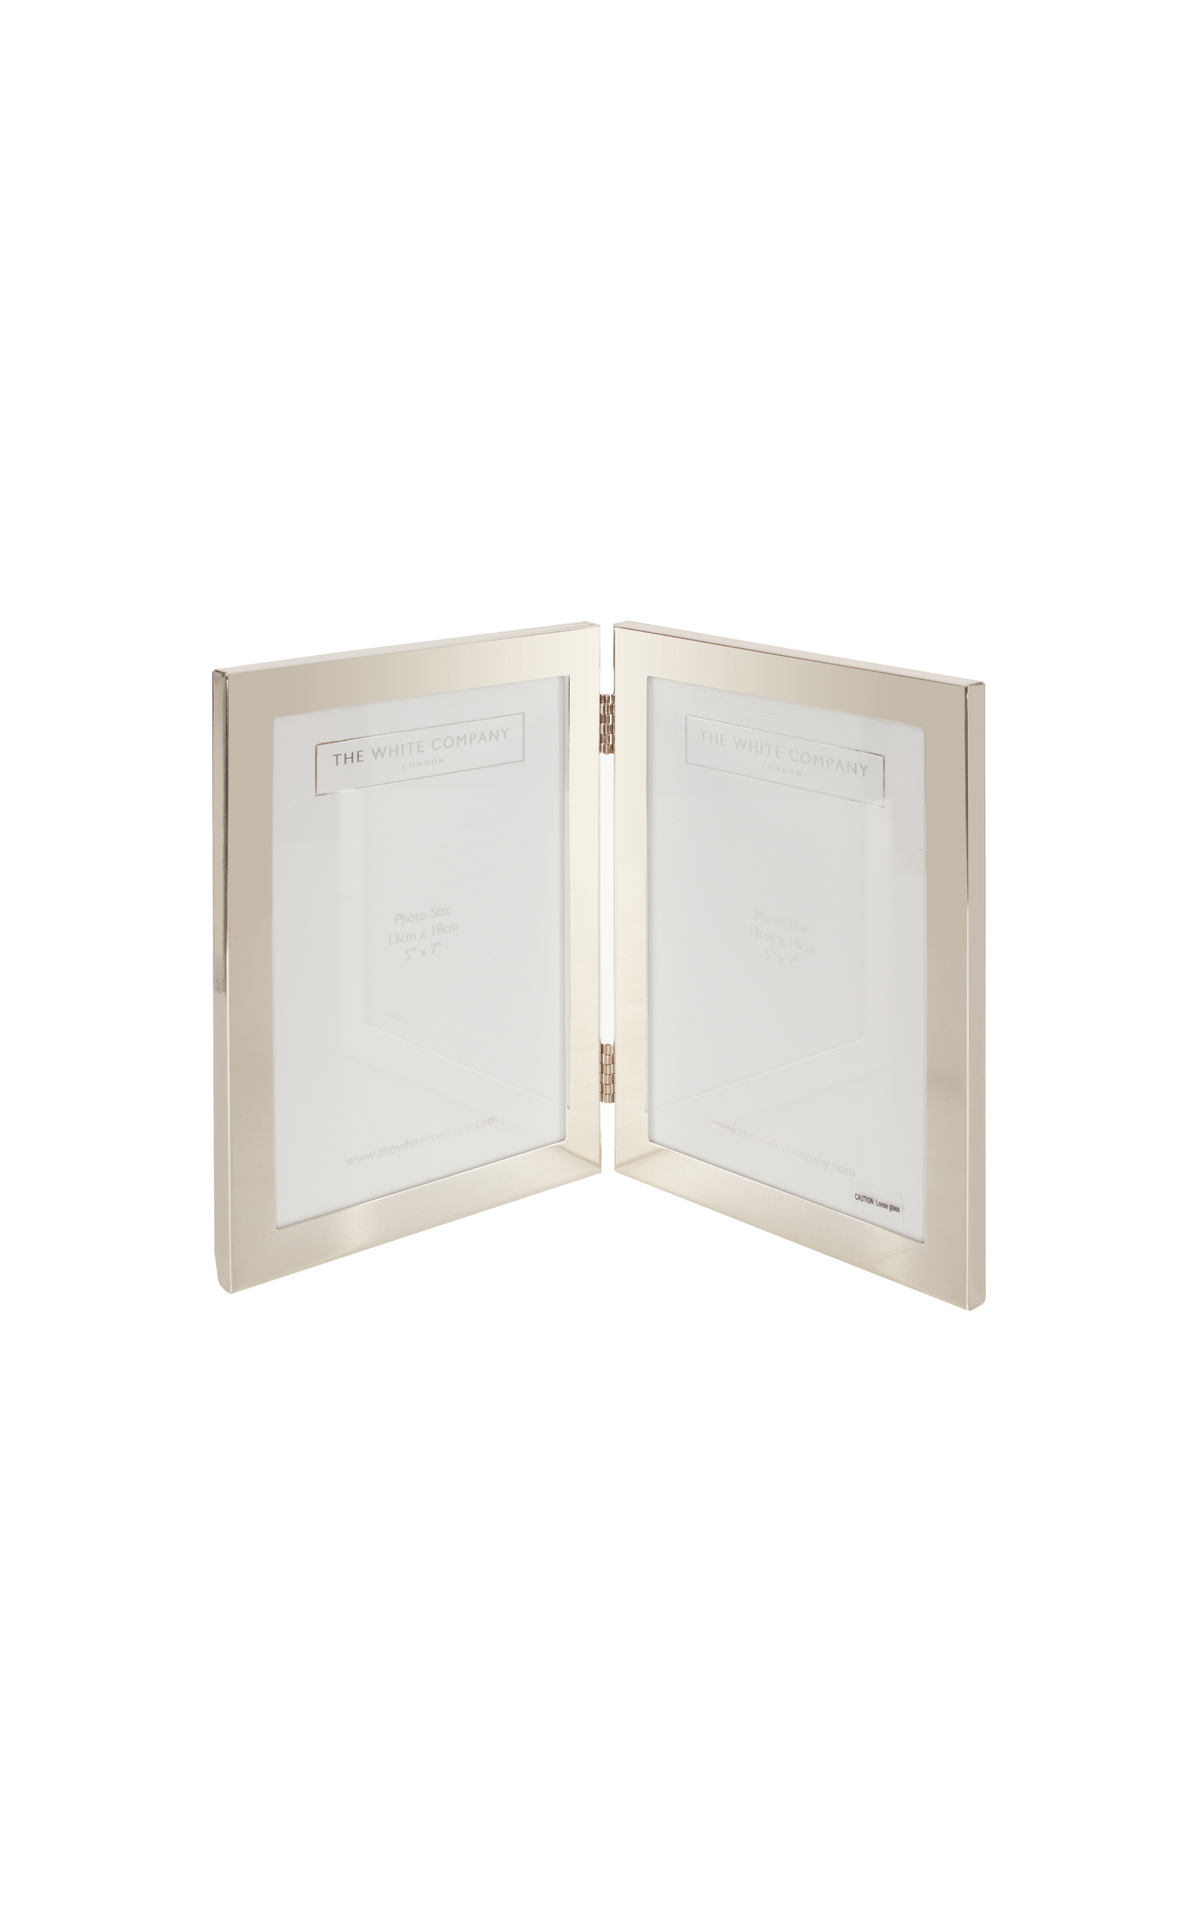 The White Company 5x7 double silver frame from Bicester Village